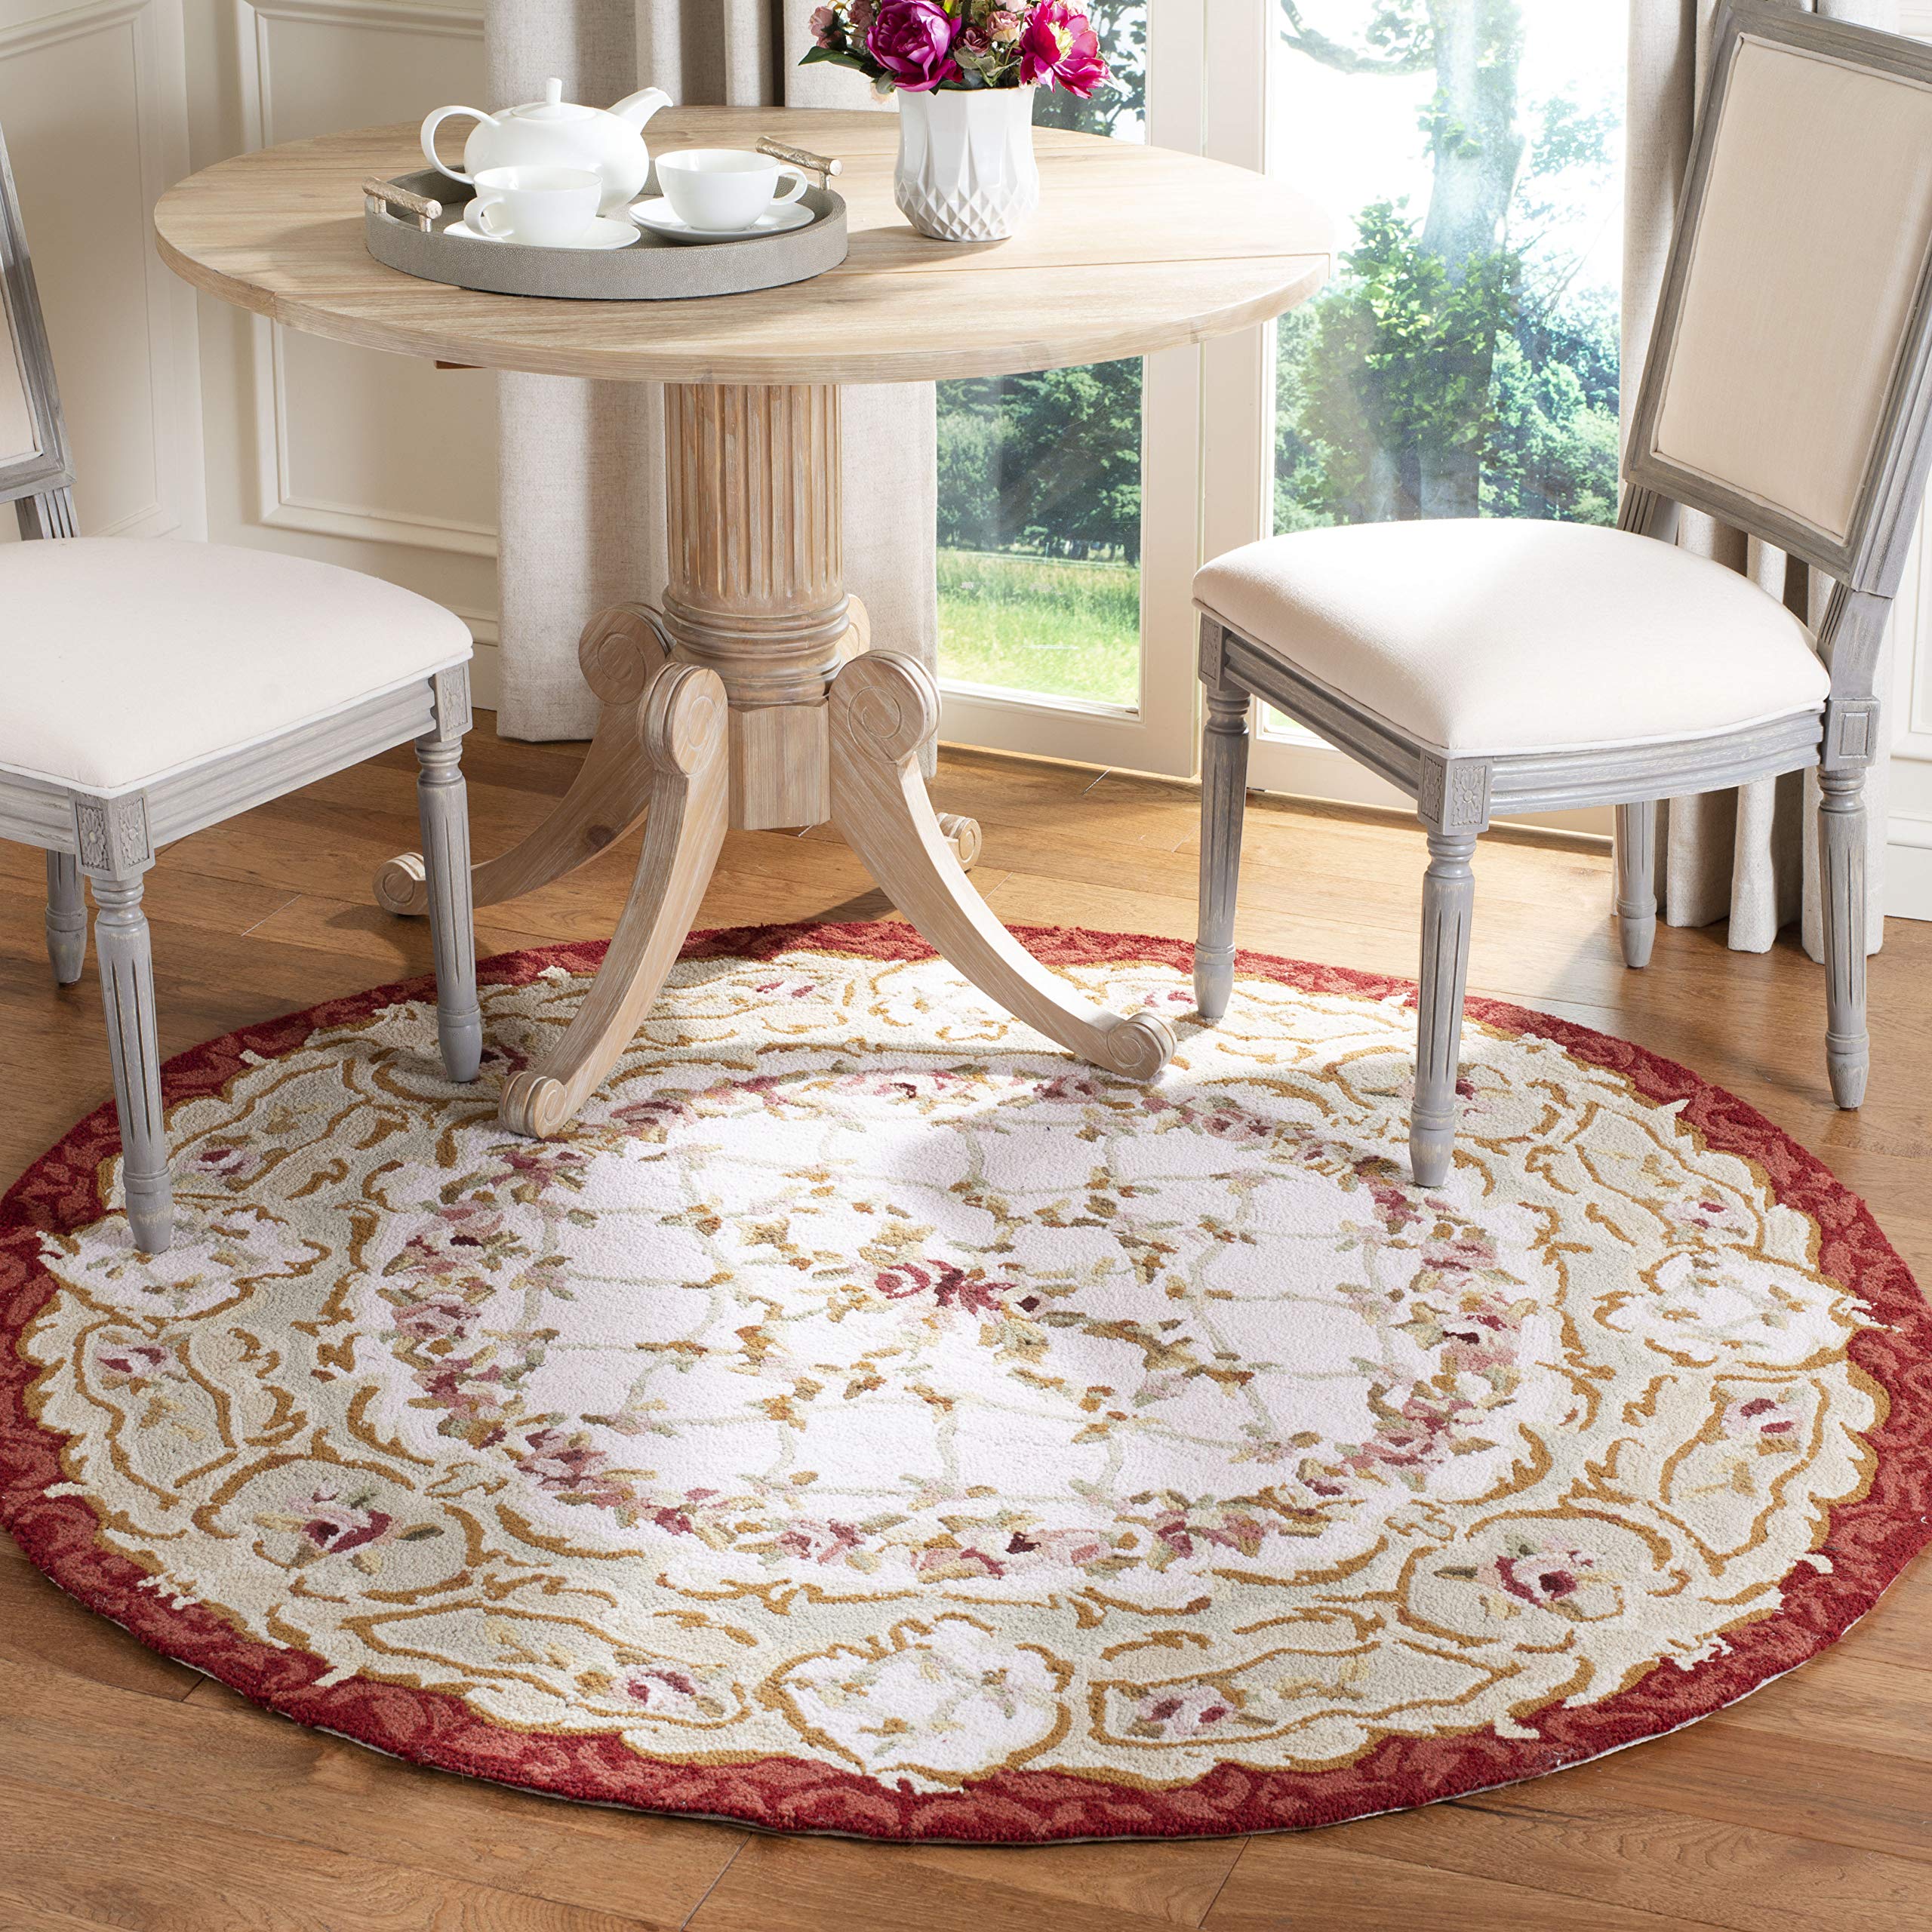 Safavieh Chelsea Collection HK73A Hand-Hooked French Country Wool Area Rug, 4' x 4' Round, Ivory / Burgundy